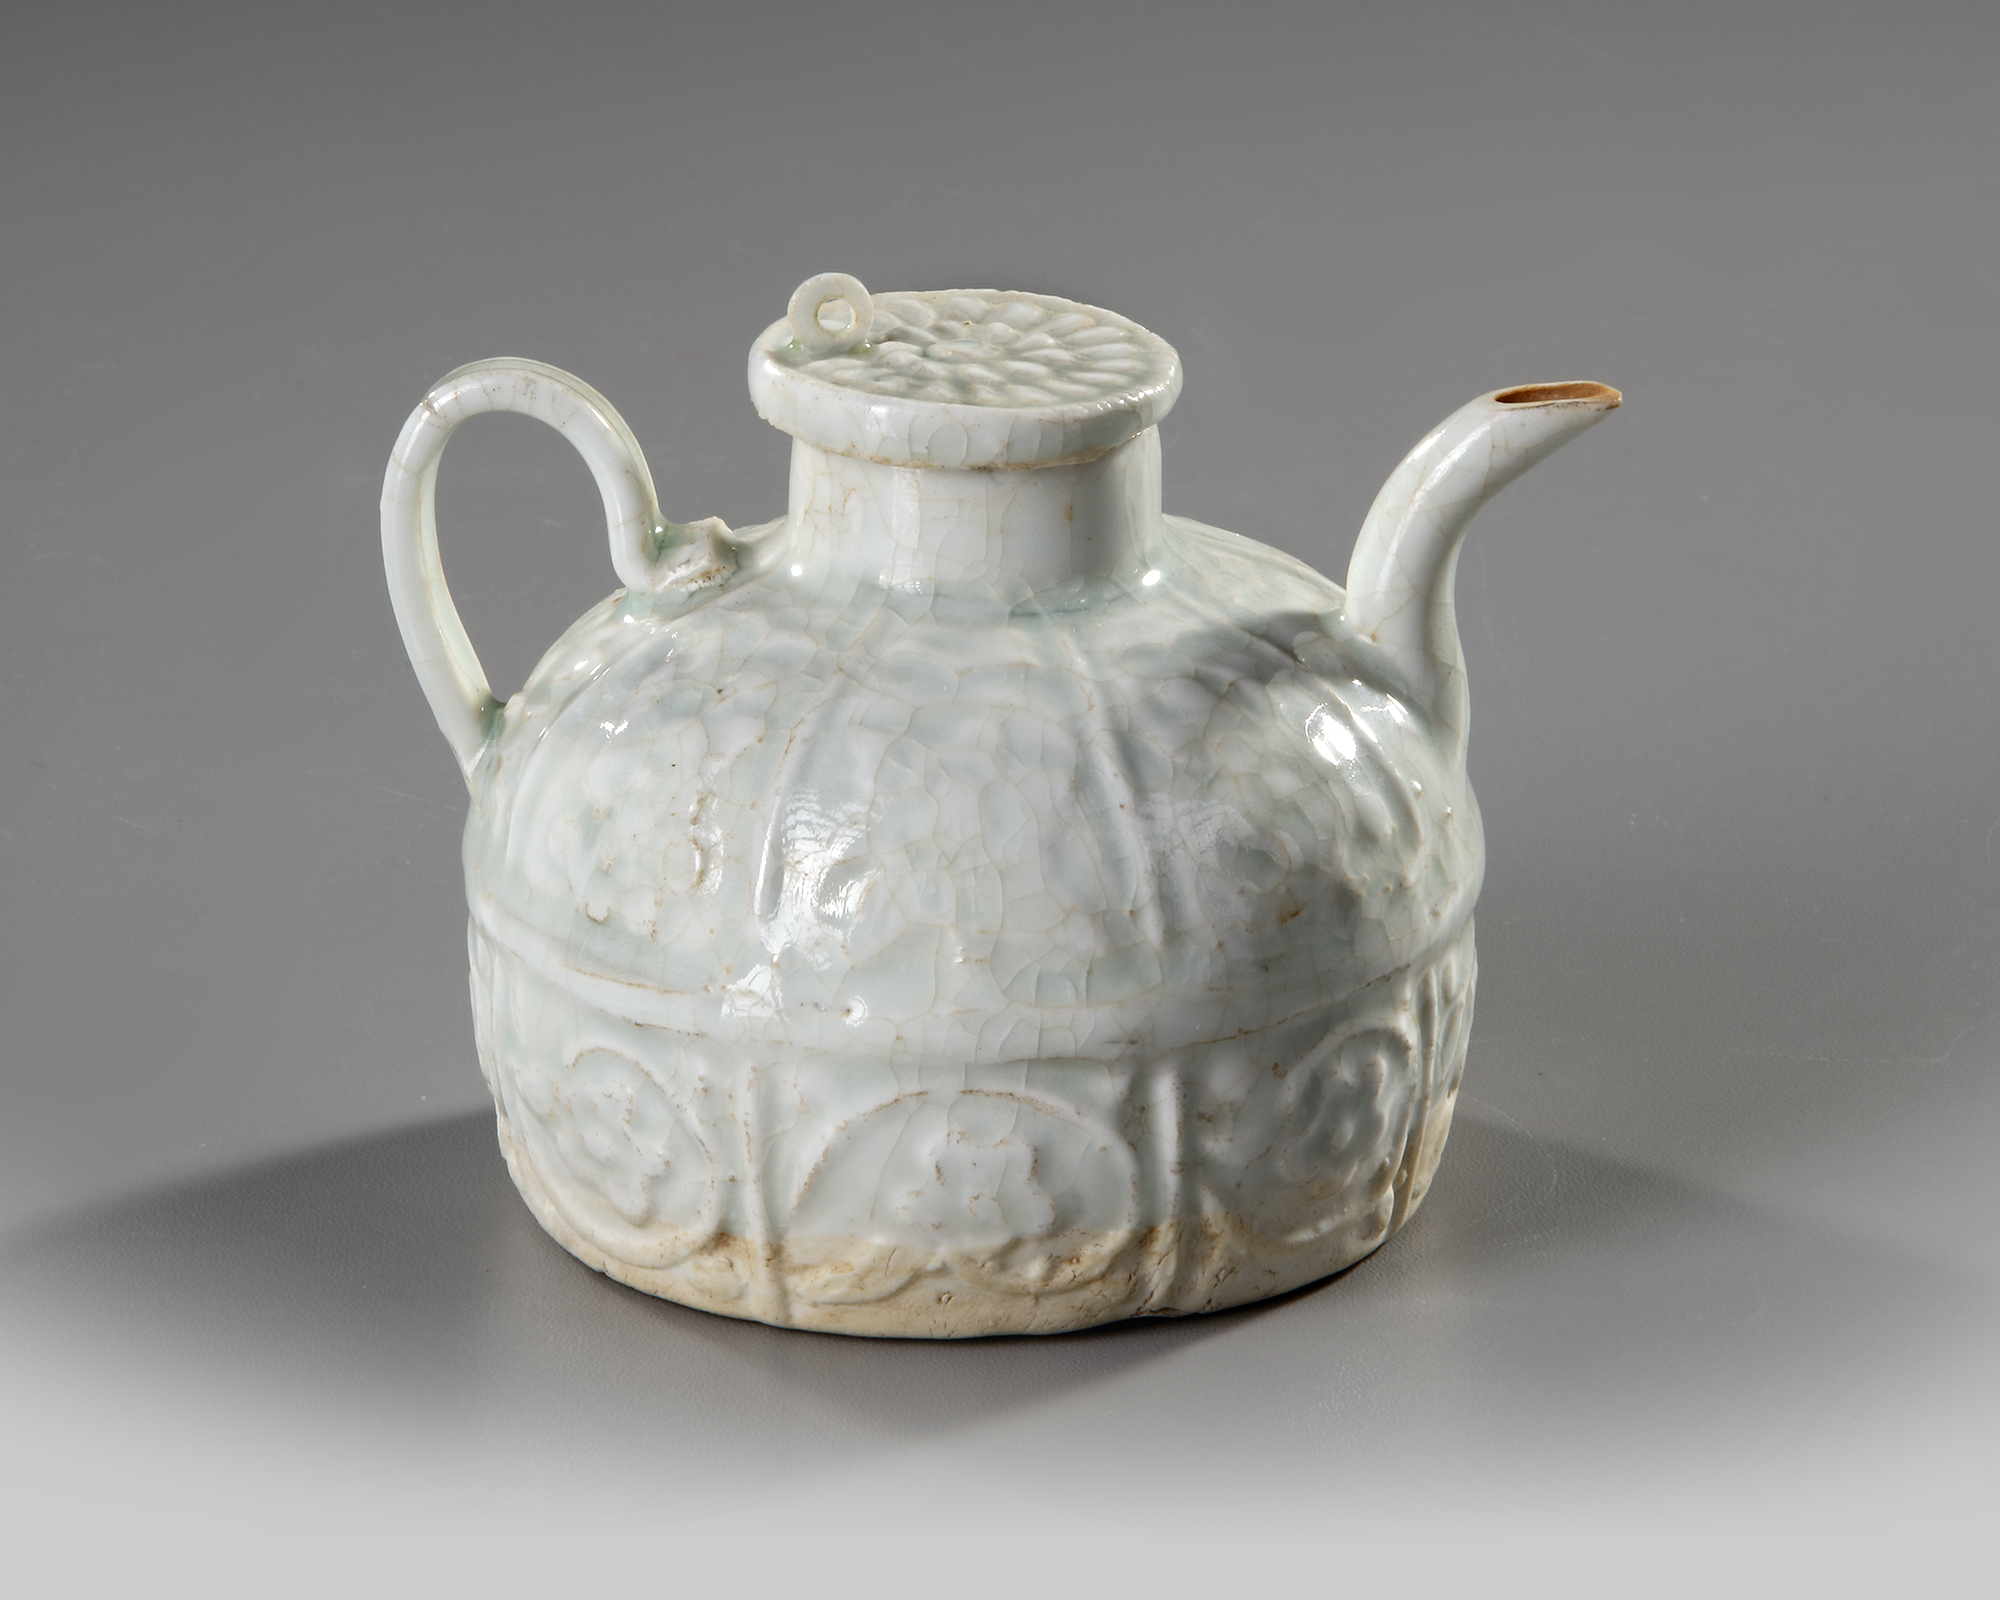 A SMALL CHINESE QINGBAI EWER, SONG DYNASTY (960-1279) - Image 3 of 5